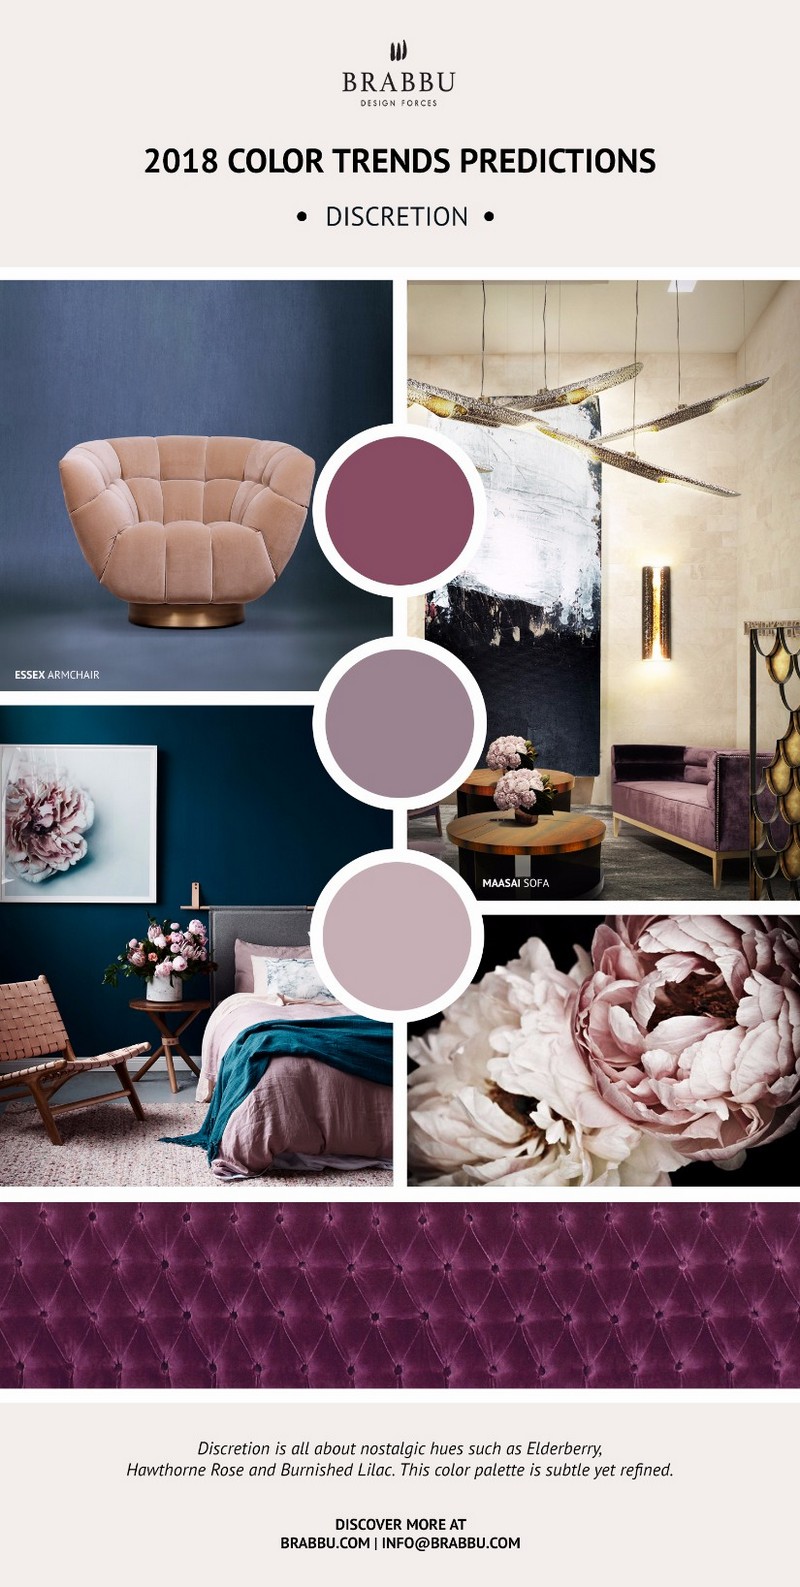 How To Decorate Your Home With Pantone 2018 Color Trends Predictions ➤ To see more news about the Interior Design Shops in the world visit us at www.interiordesignshop.net/ #interiordesign #homedecor #interiordesignshop #shopping @interiordesignshop @bocadolobo @delightfulll @brabbu @essentialhomeeu @circudesign @mvalentinabath @luxxu @covethouse_